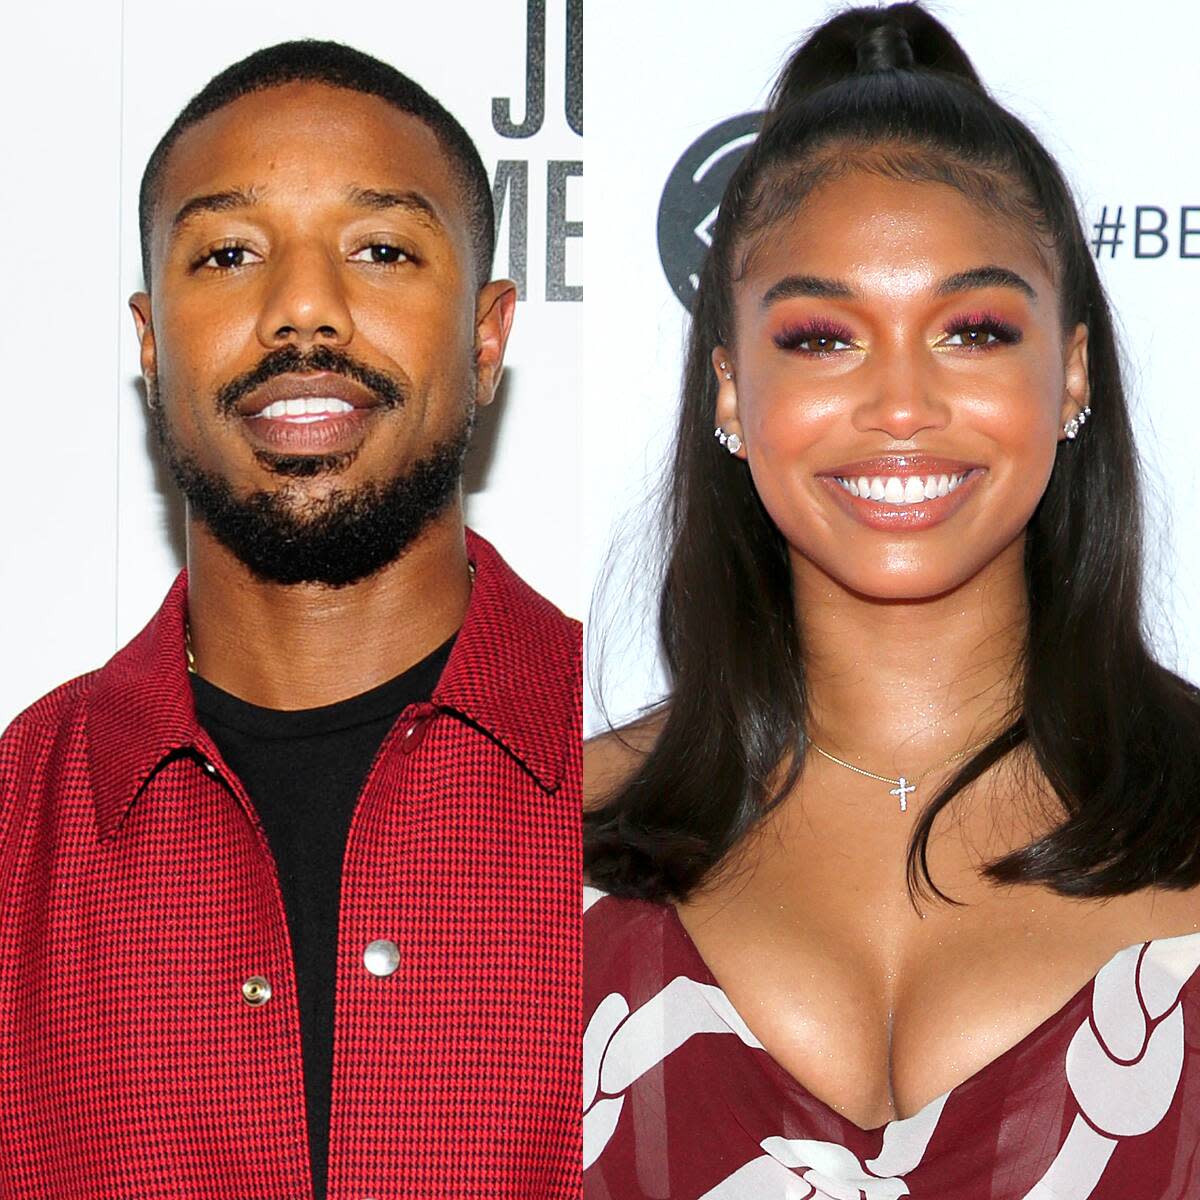 Michael B. Jordan and Lori Harvey on vacation in Salt Lake City for the New Year holiday